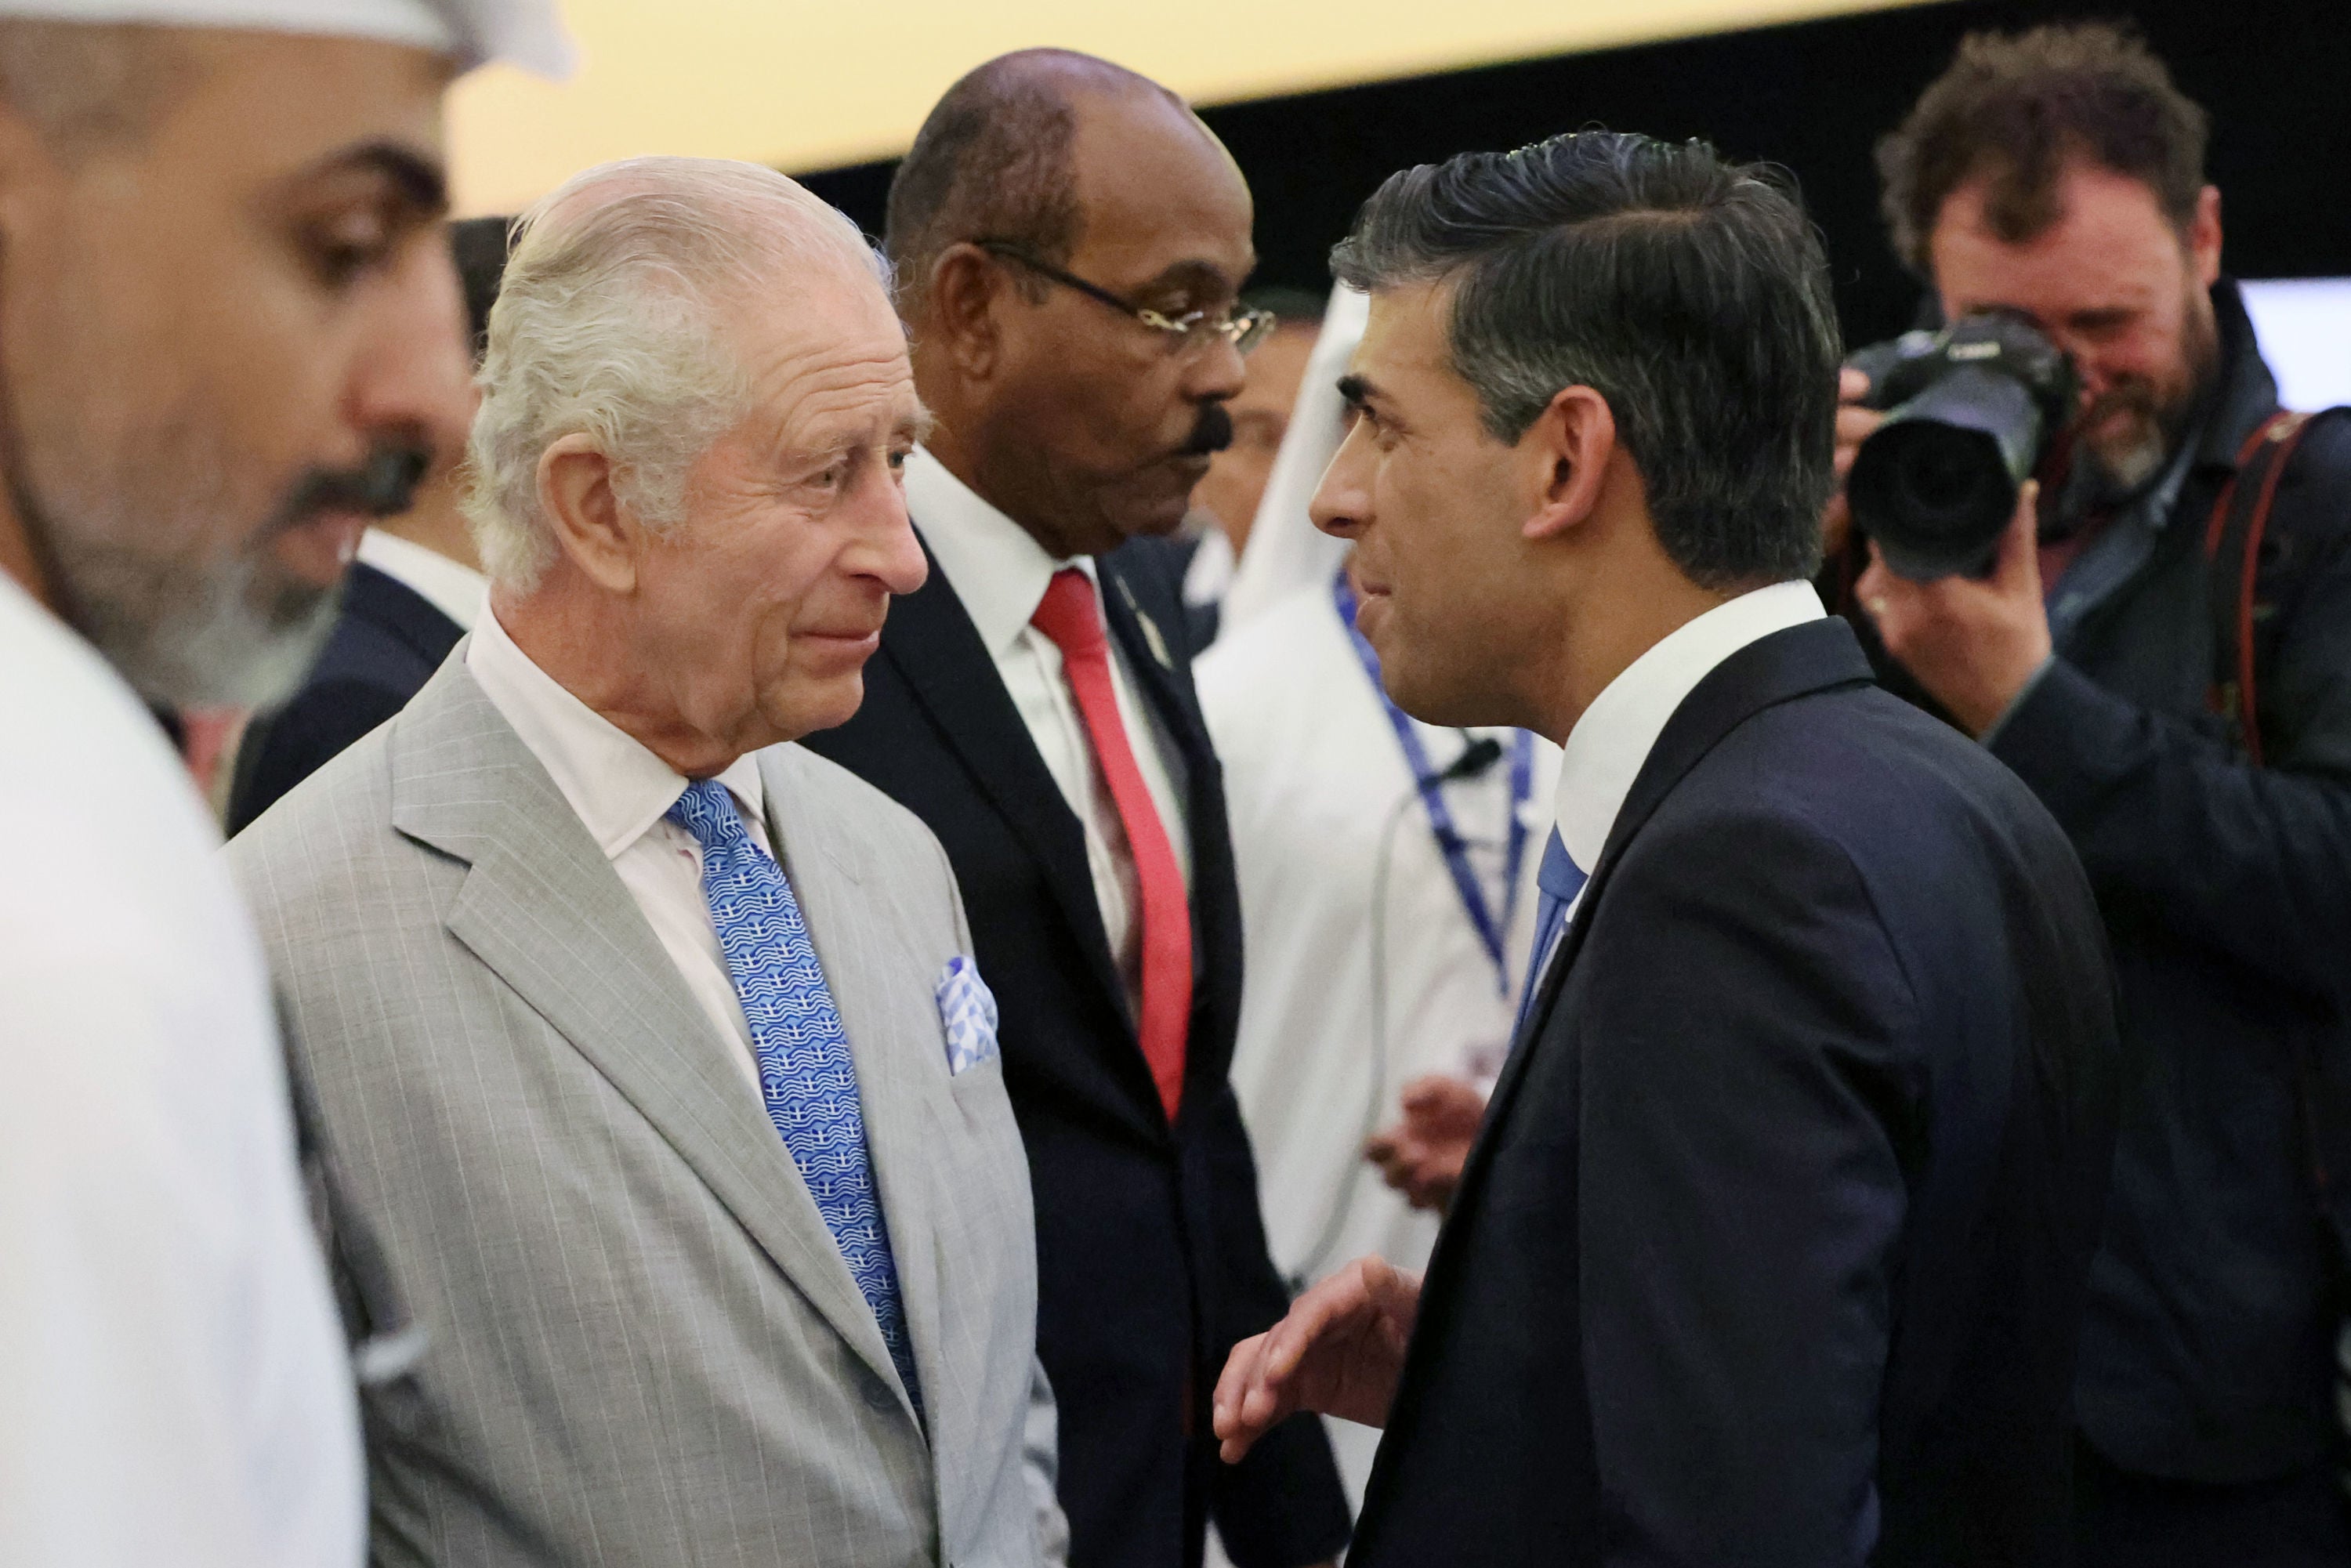 King Charles III (left) speaks with prime minister Rishi Sunak as they attend the opening ceremony of the World Climate Action Summit